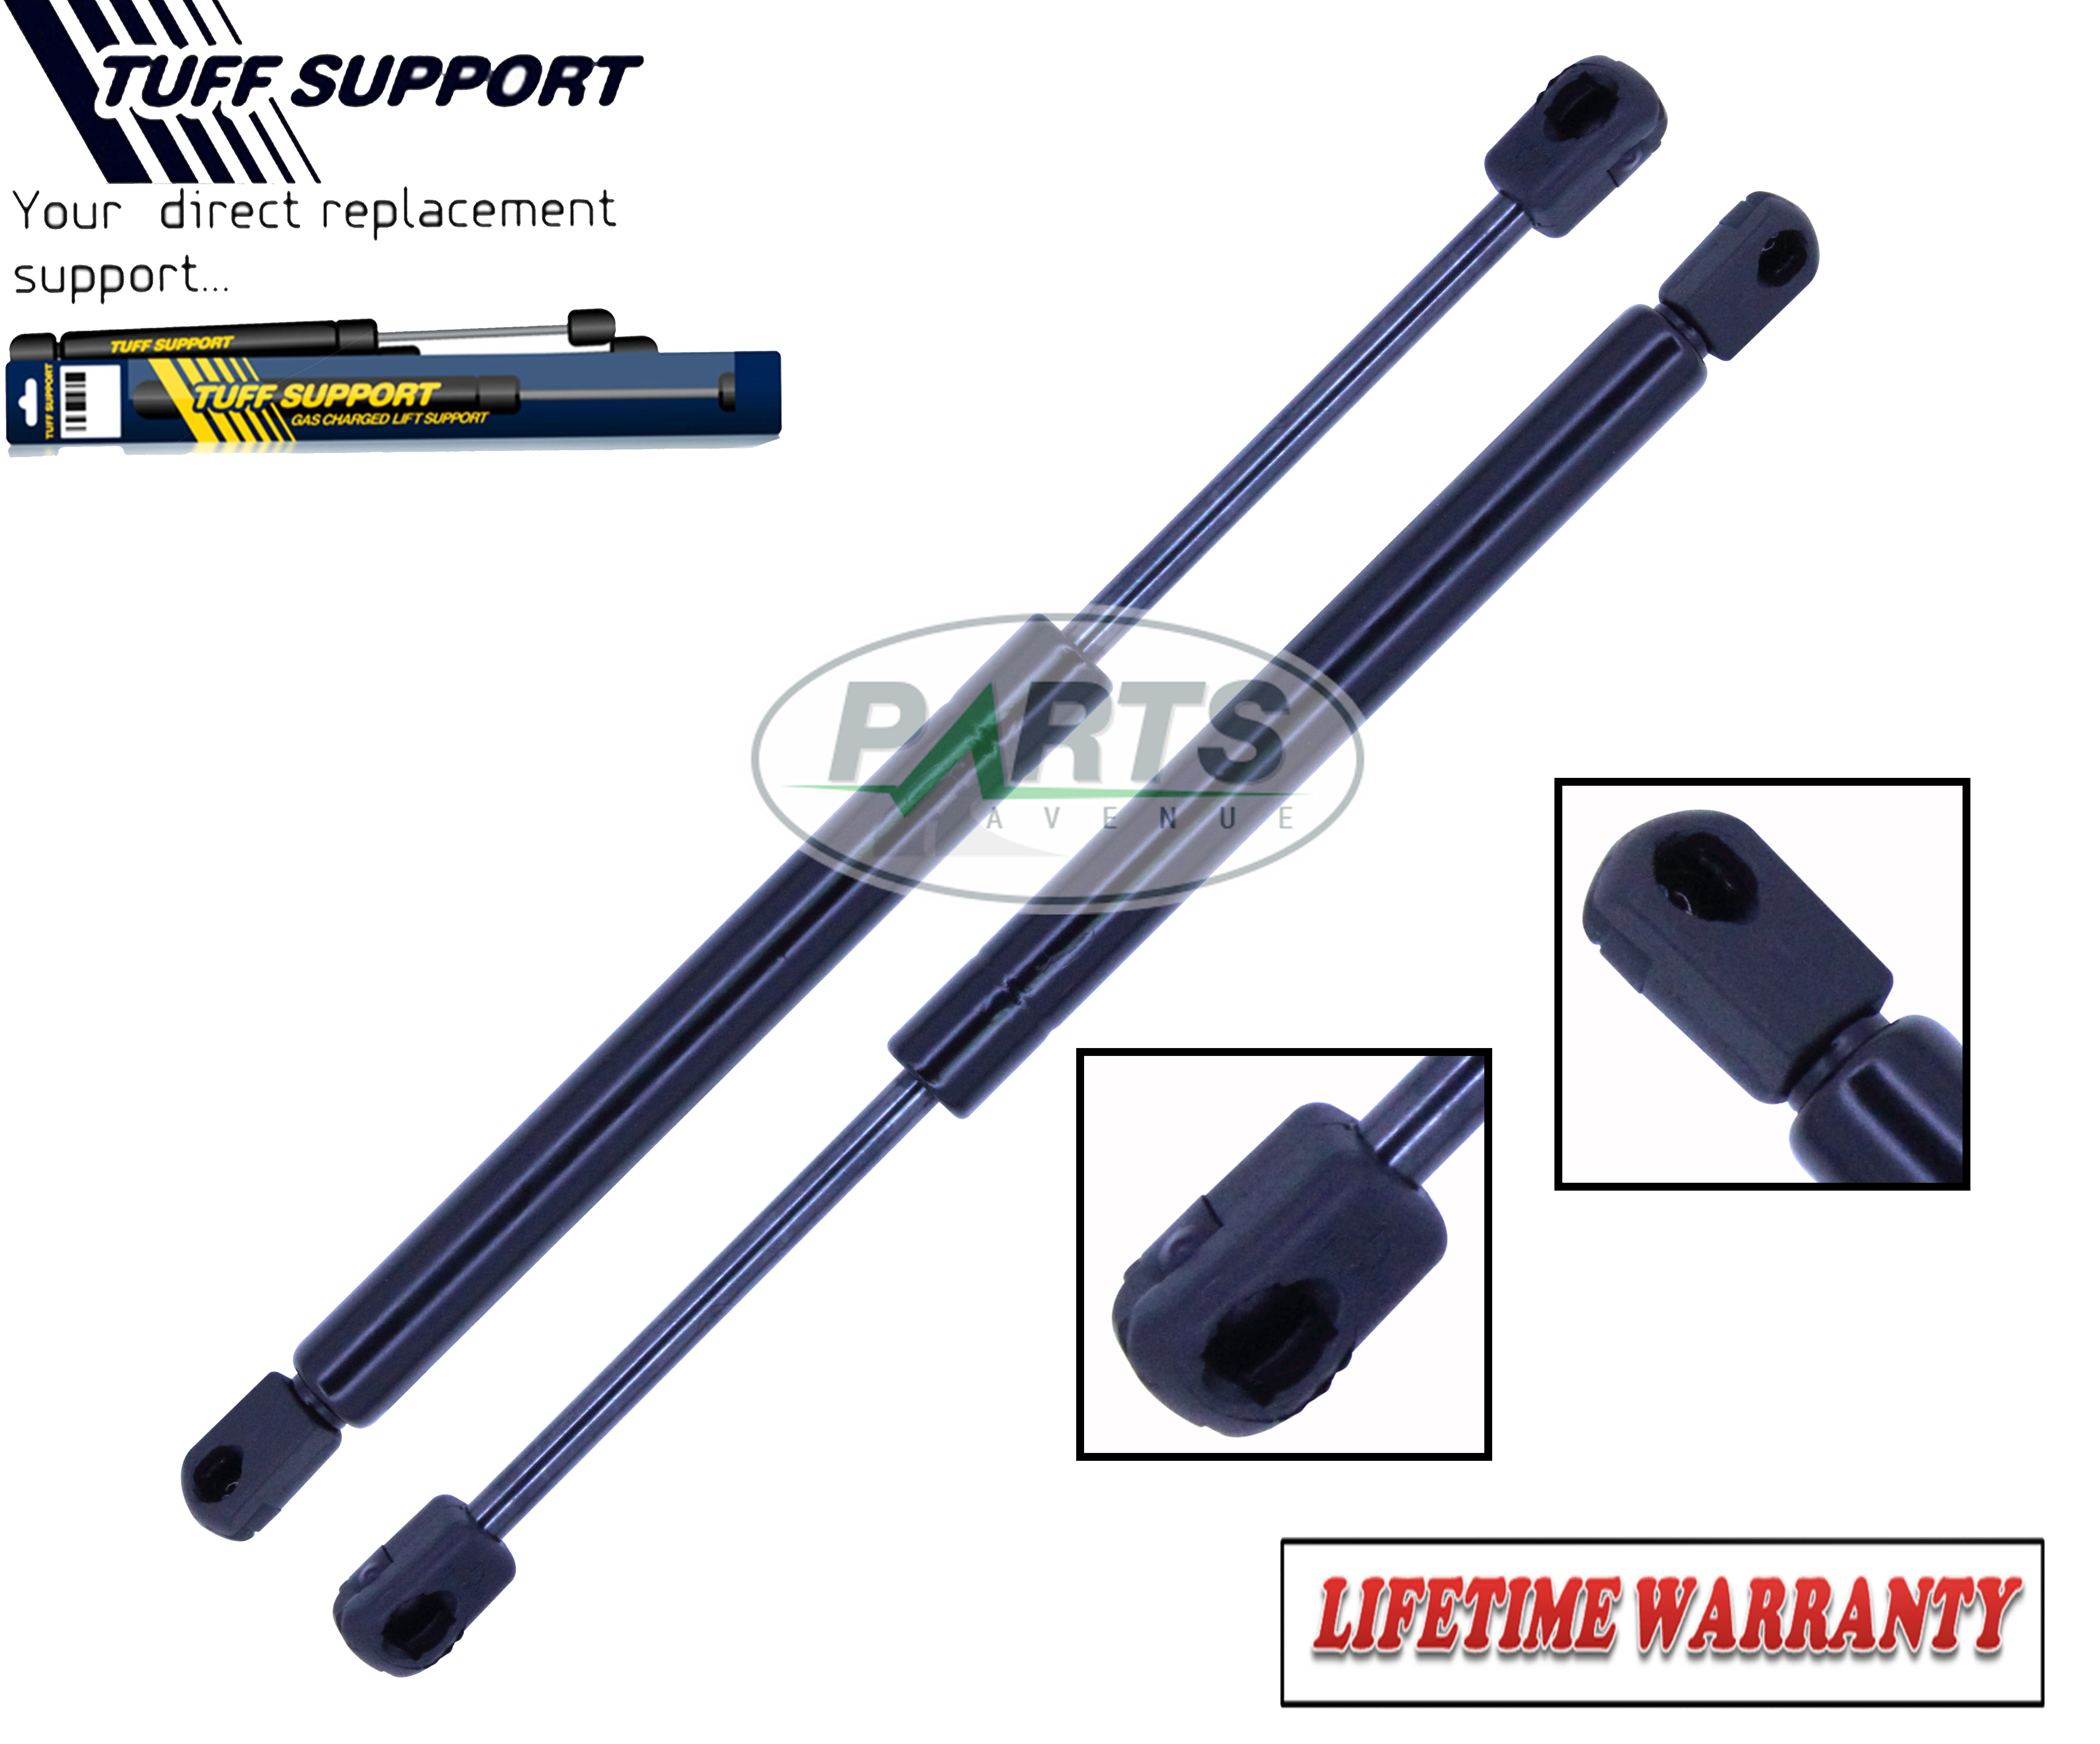 Rear Trunk Lift Support Gas Struts Fit 2008-2012 Chevrolet Malibu TUPARTS Automotive Replacement Shock Lift Supports